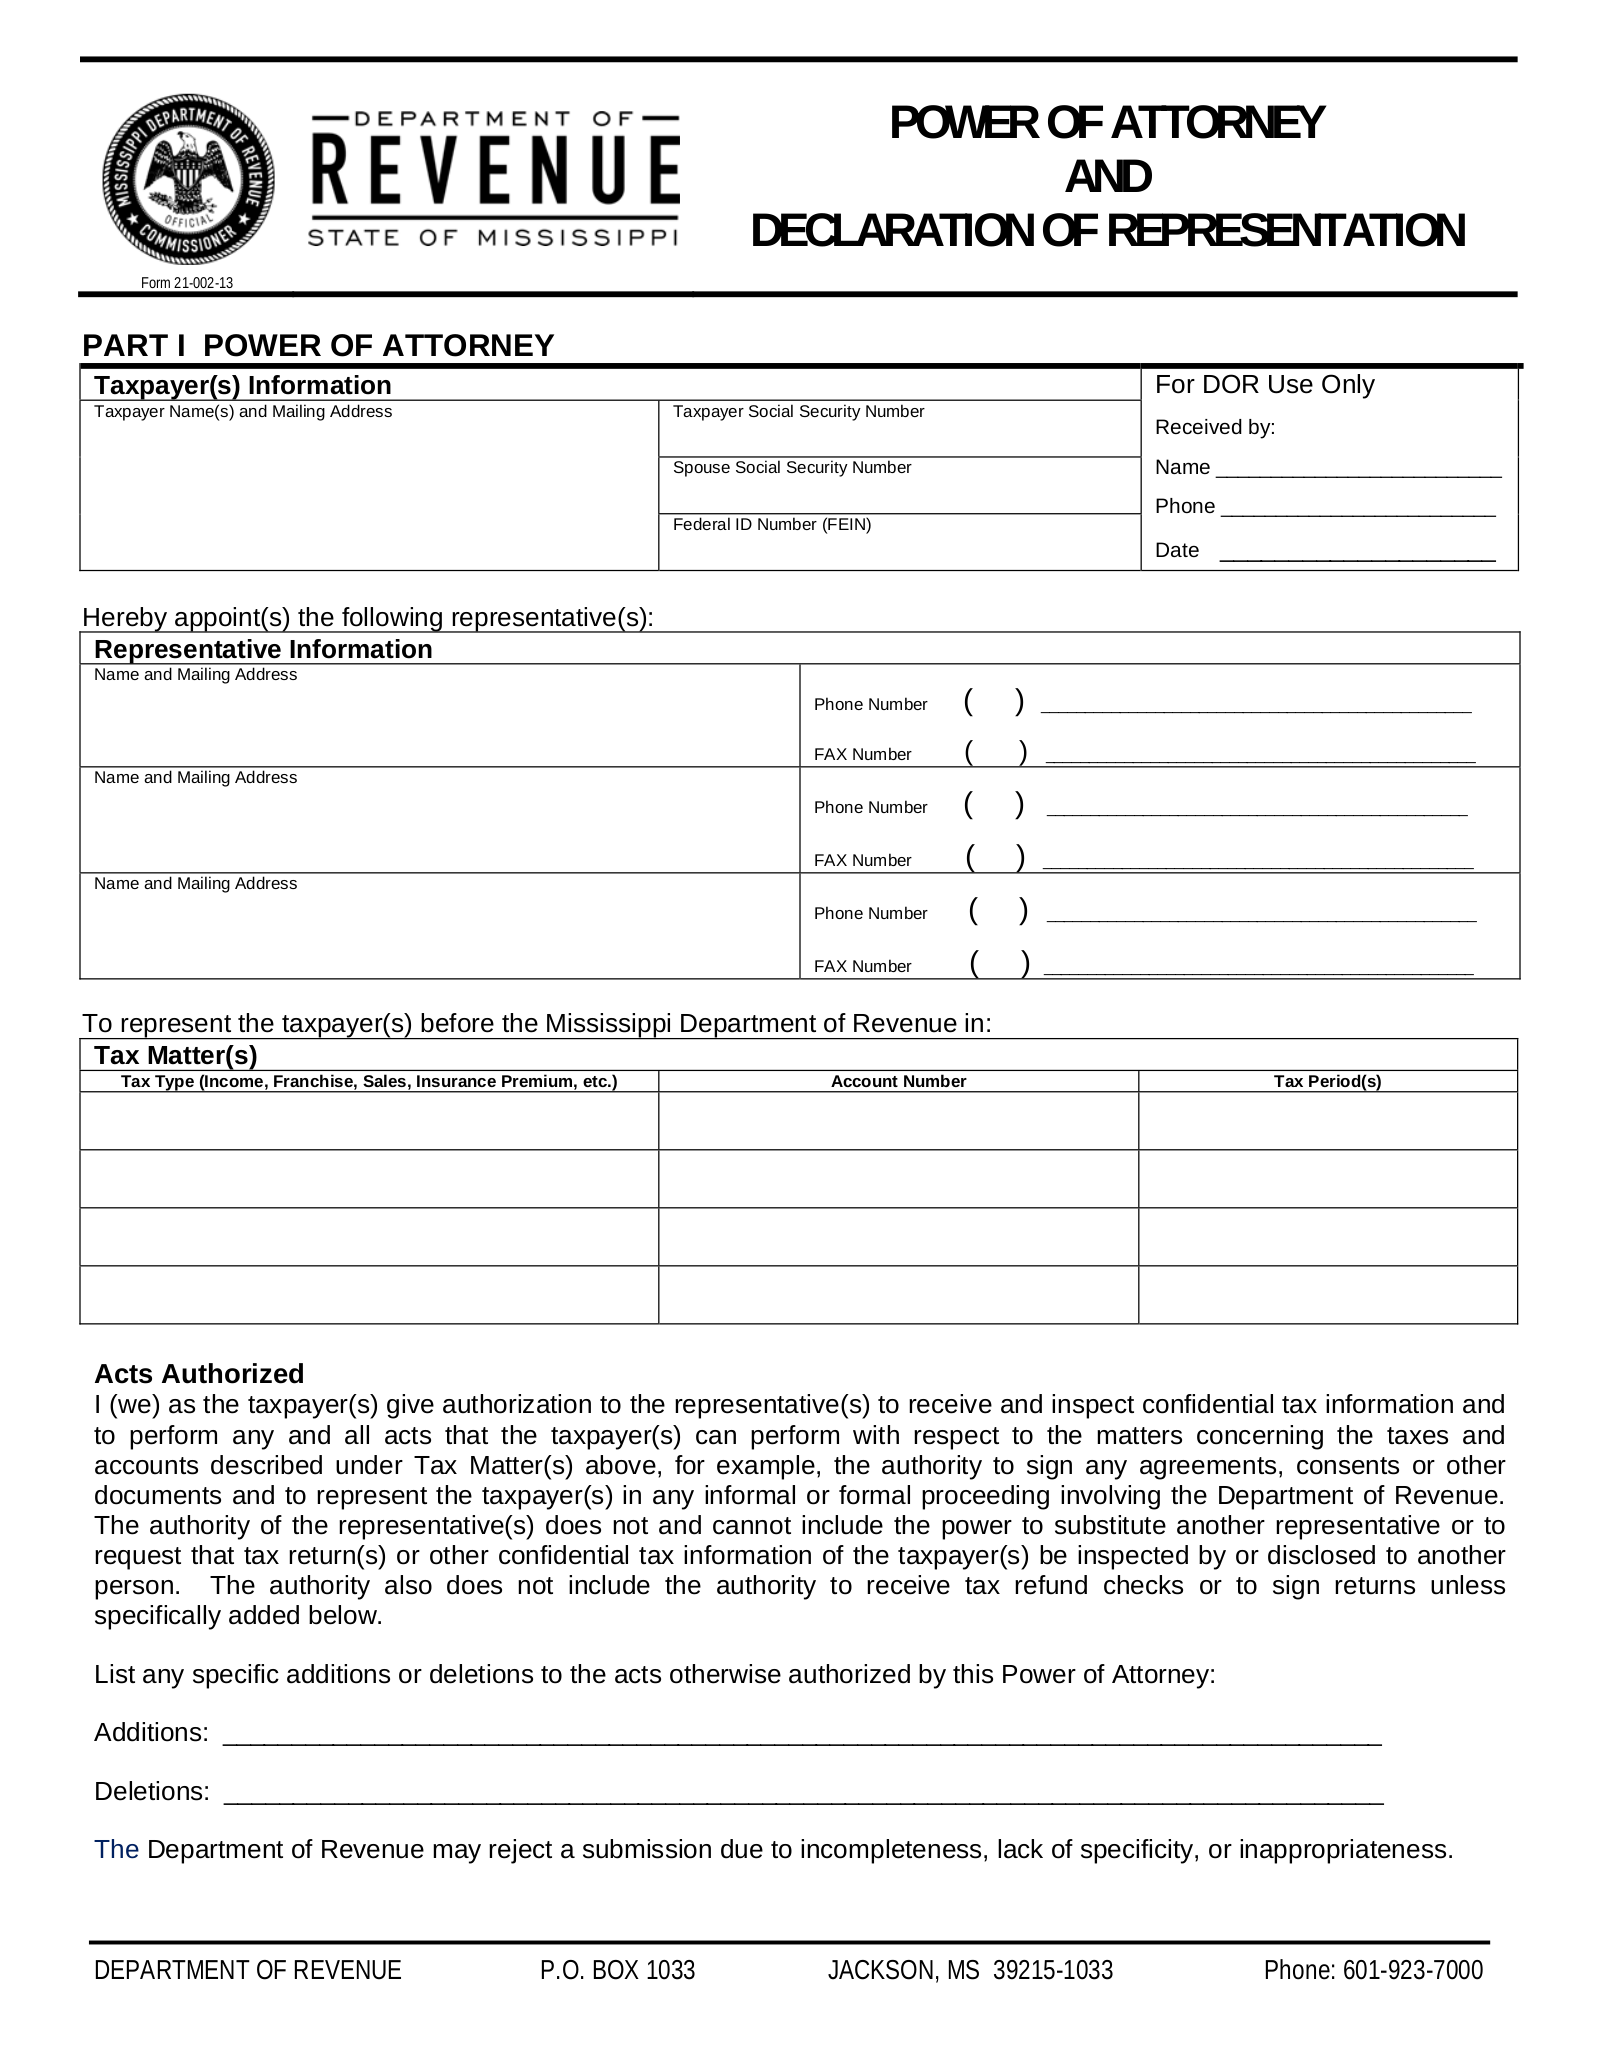 Mississippi Tax Power of Attorney (Form 21-002)